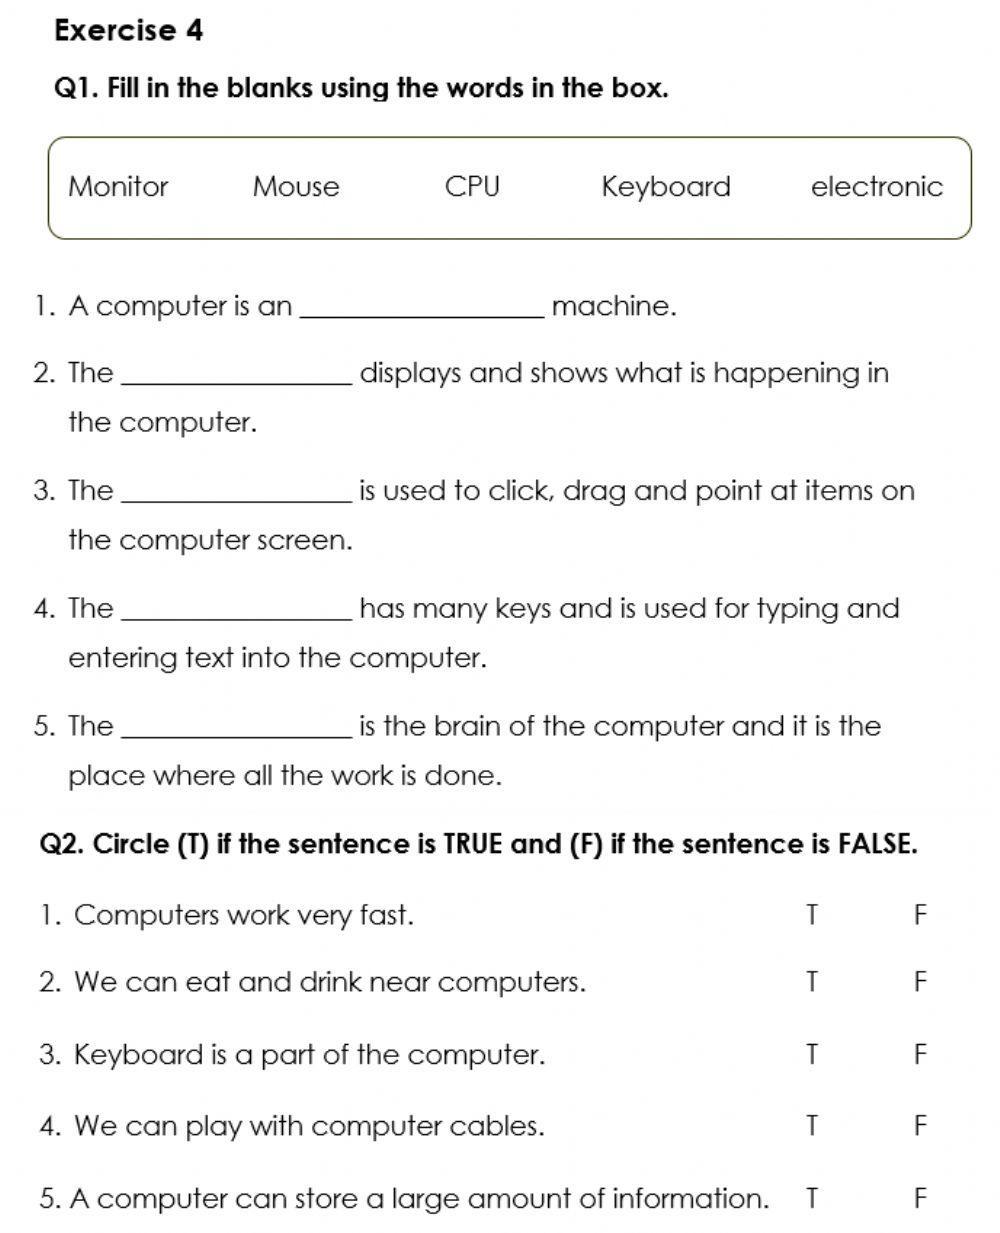 Chapter 4 - computer at glance - Exercise 4